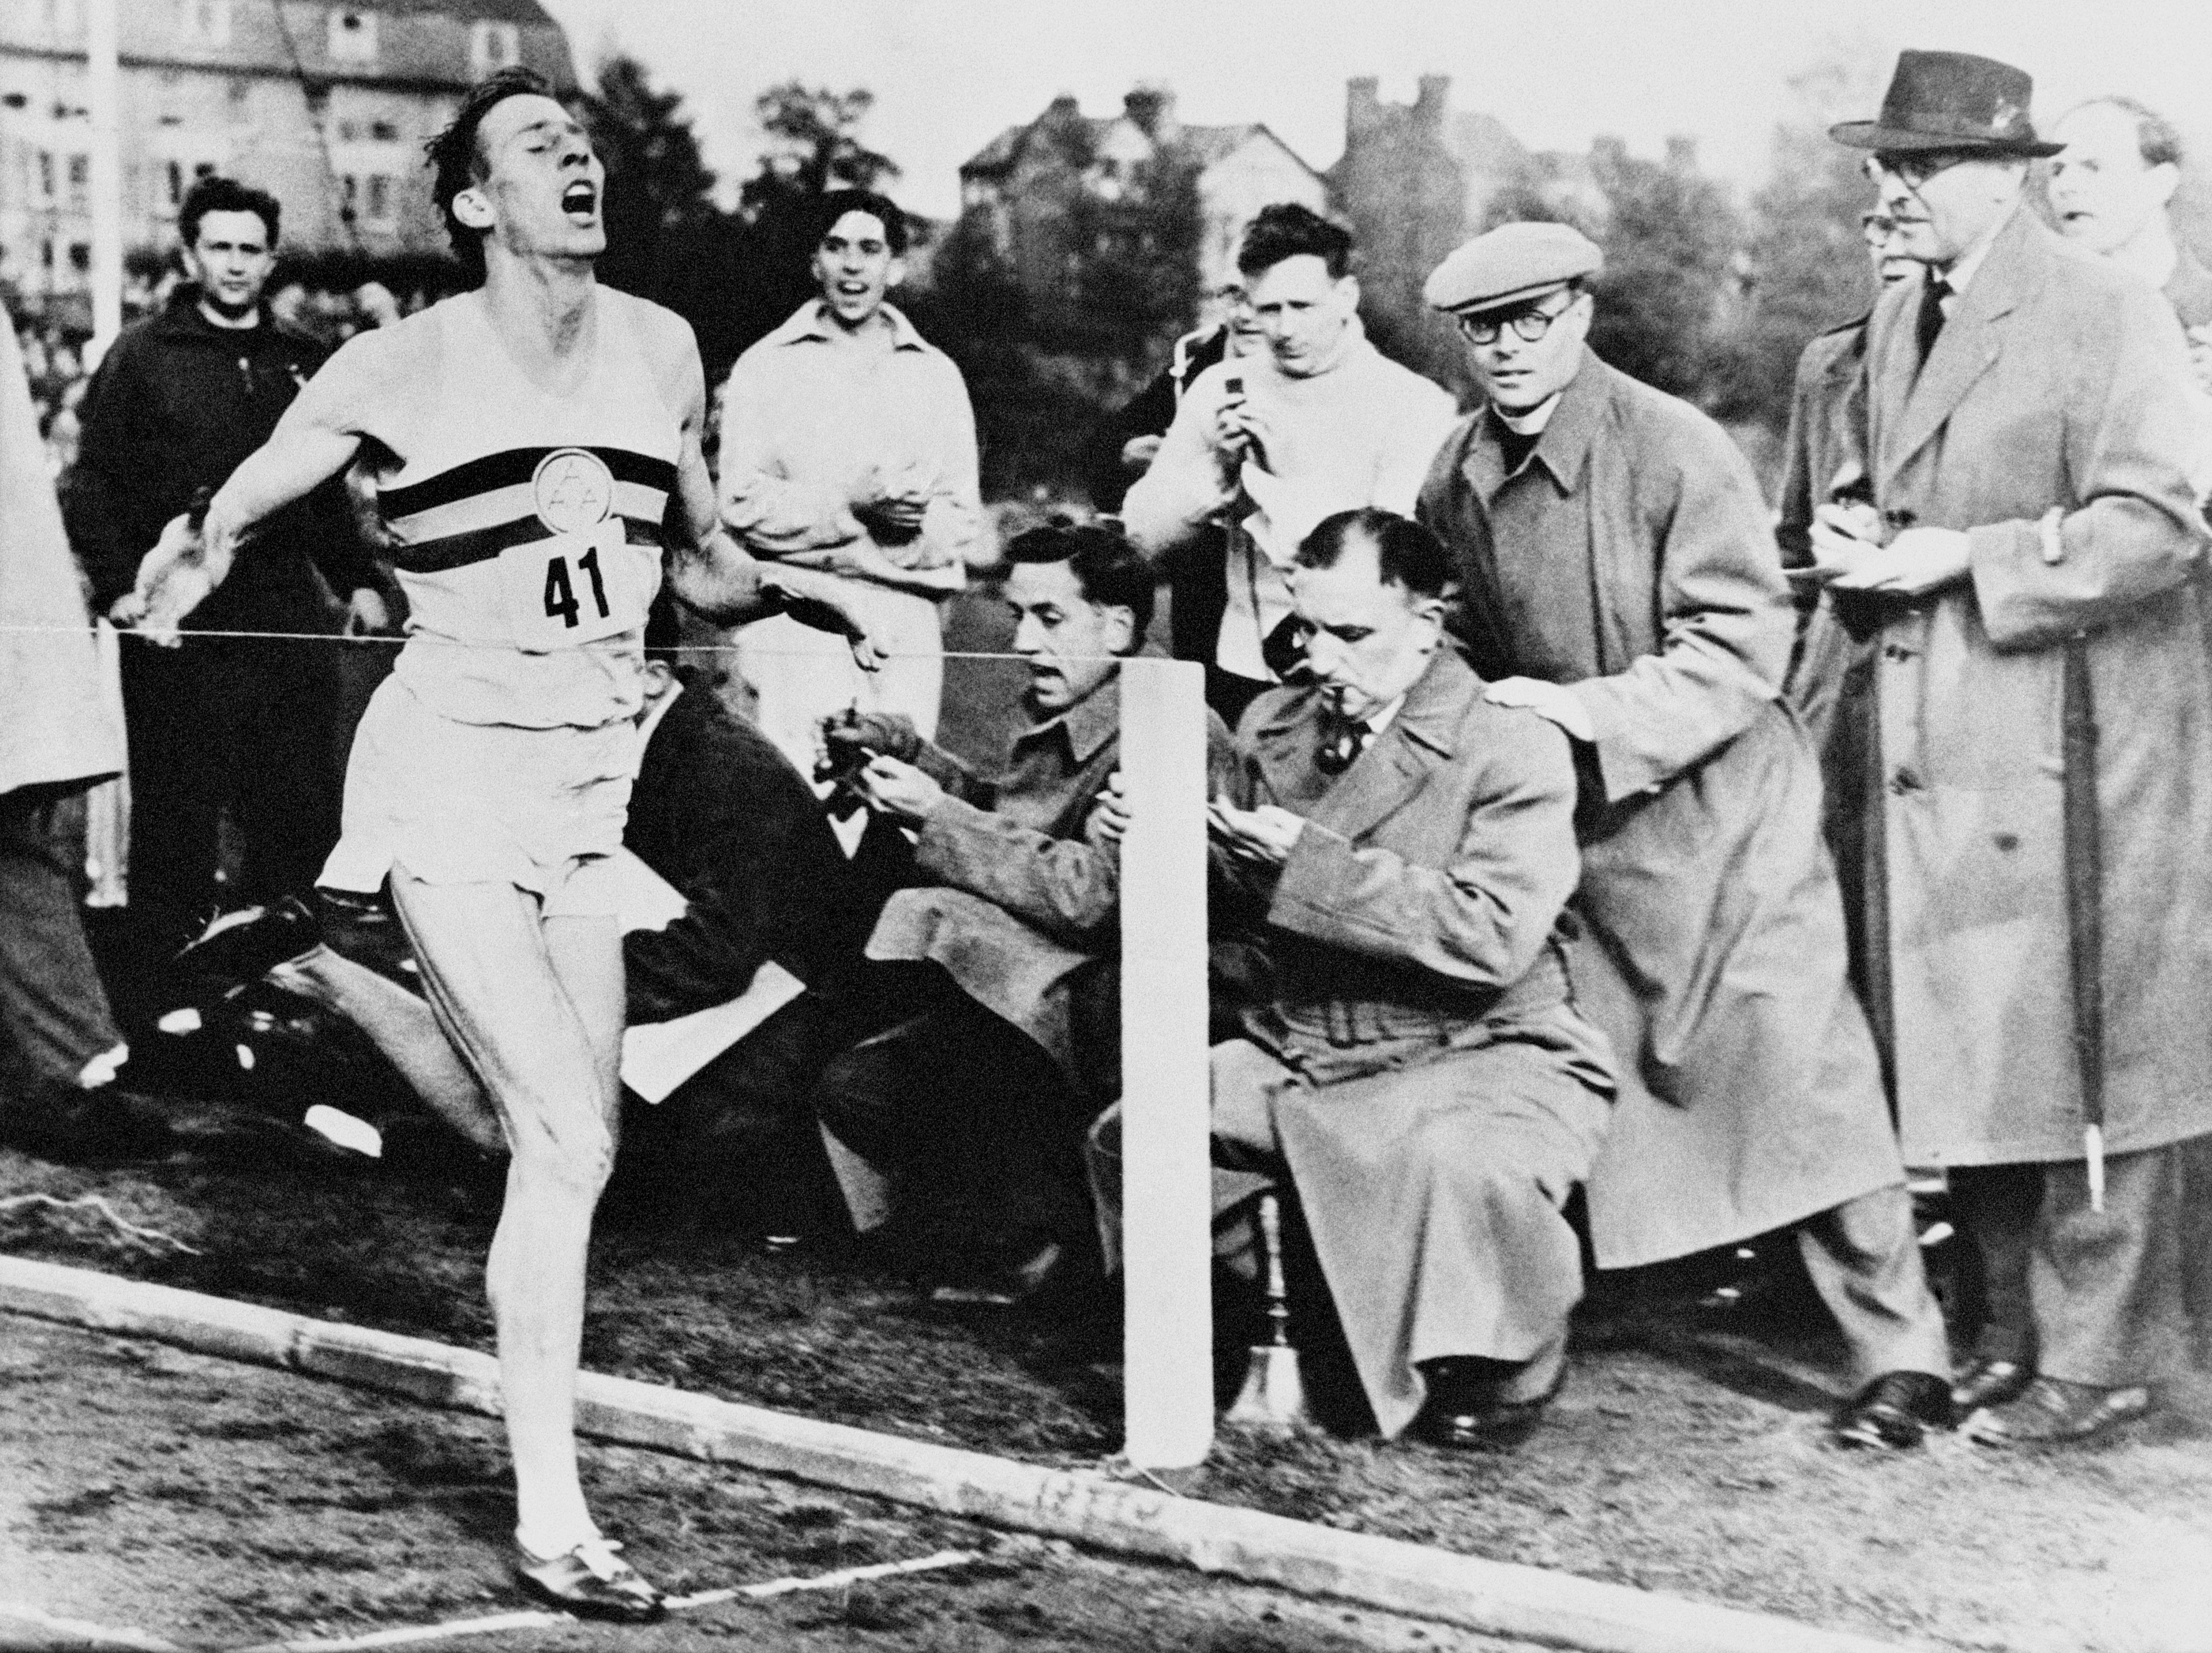 Roger Bannister completes a sub four-minute mile